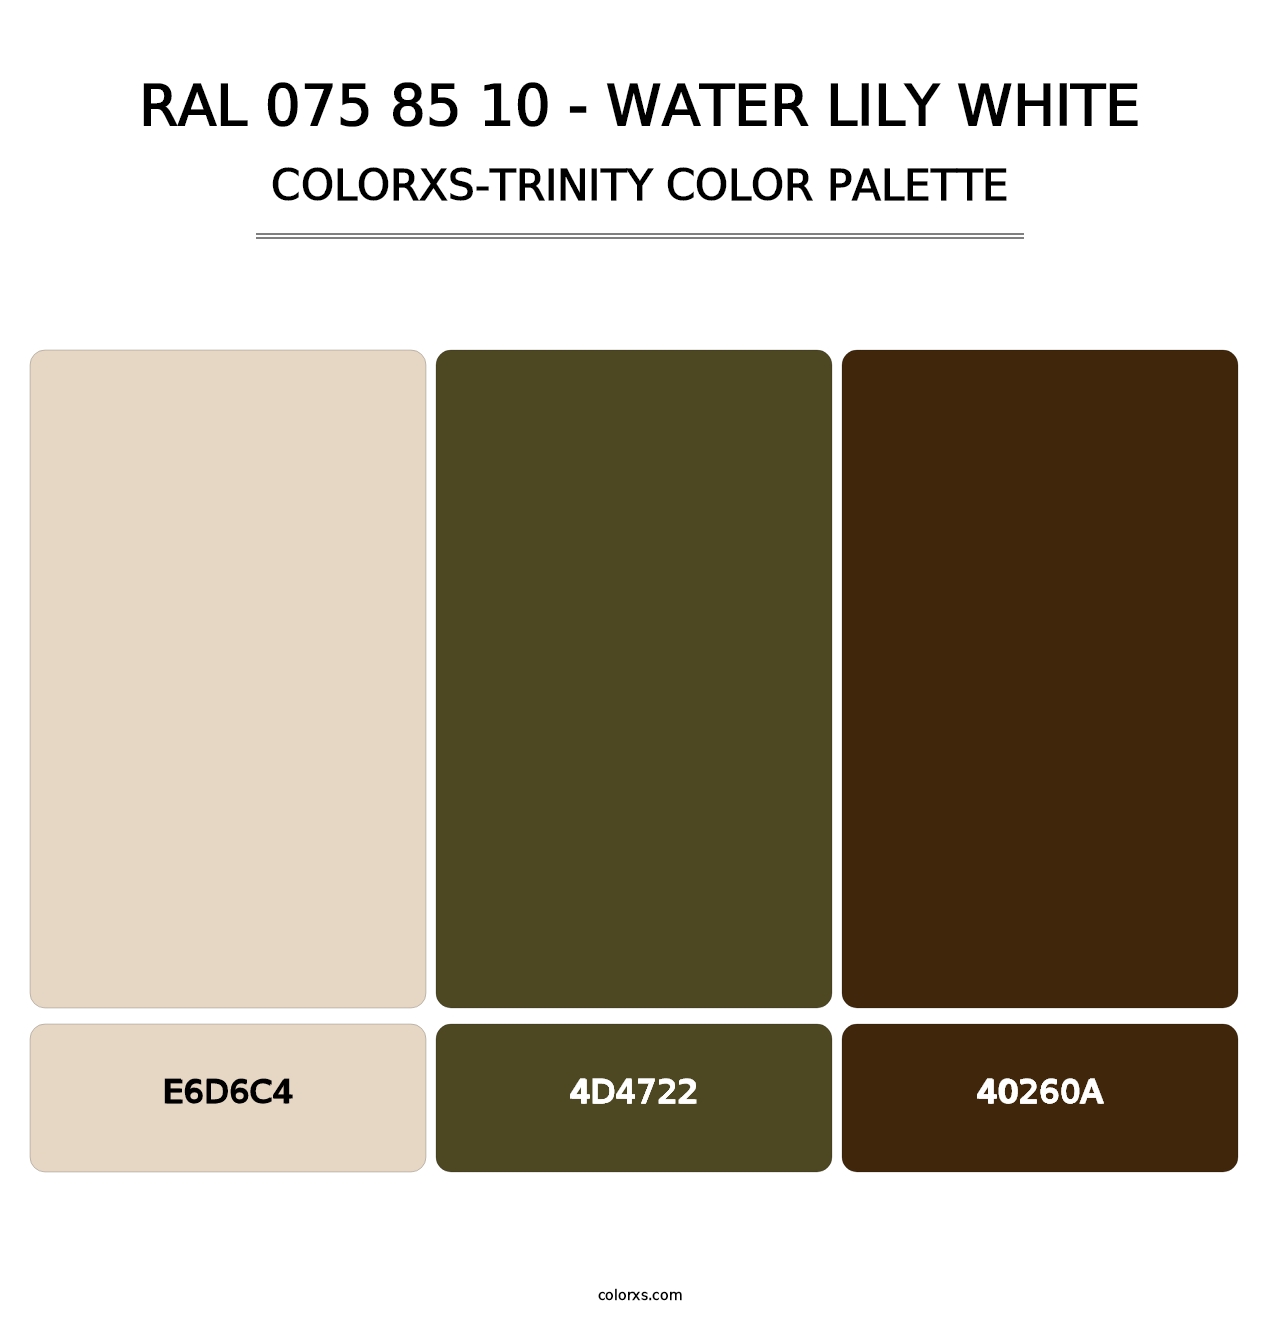 RAL 075 85 10 - Water Lily White - Colorxs Trinity Palette